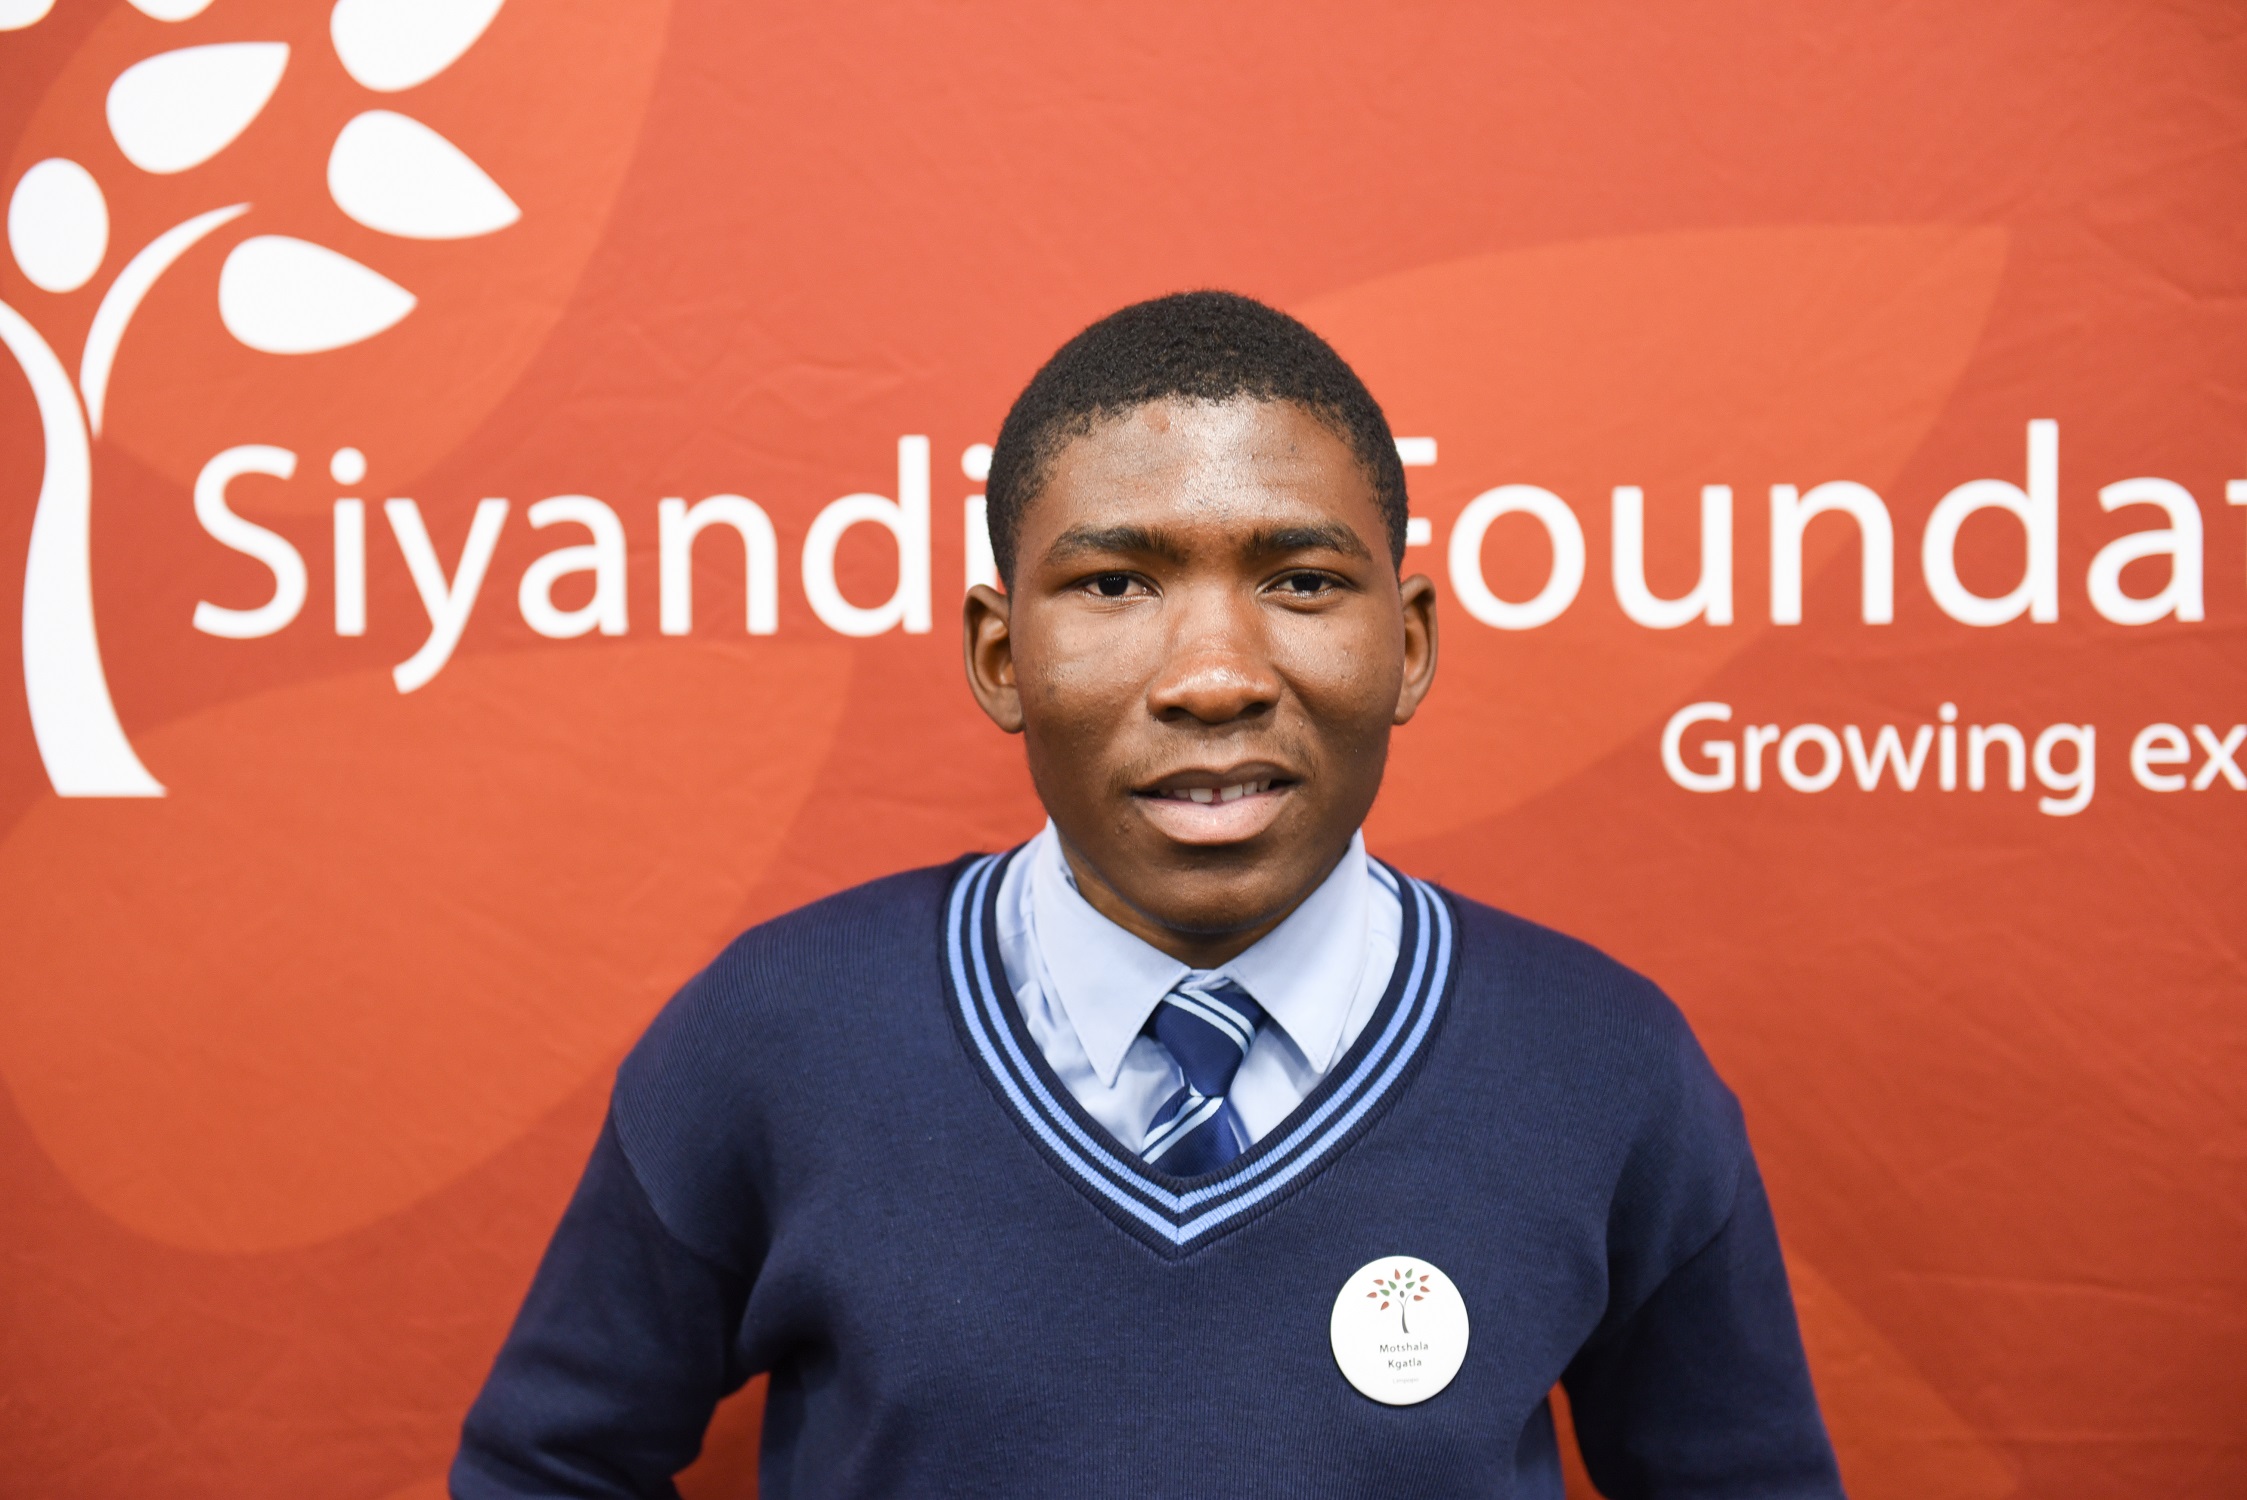 Siyandisa recipient encourages others to strive for the best!